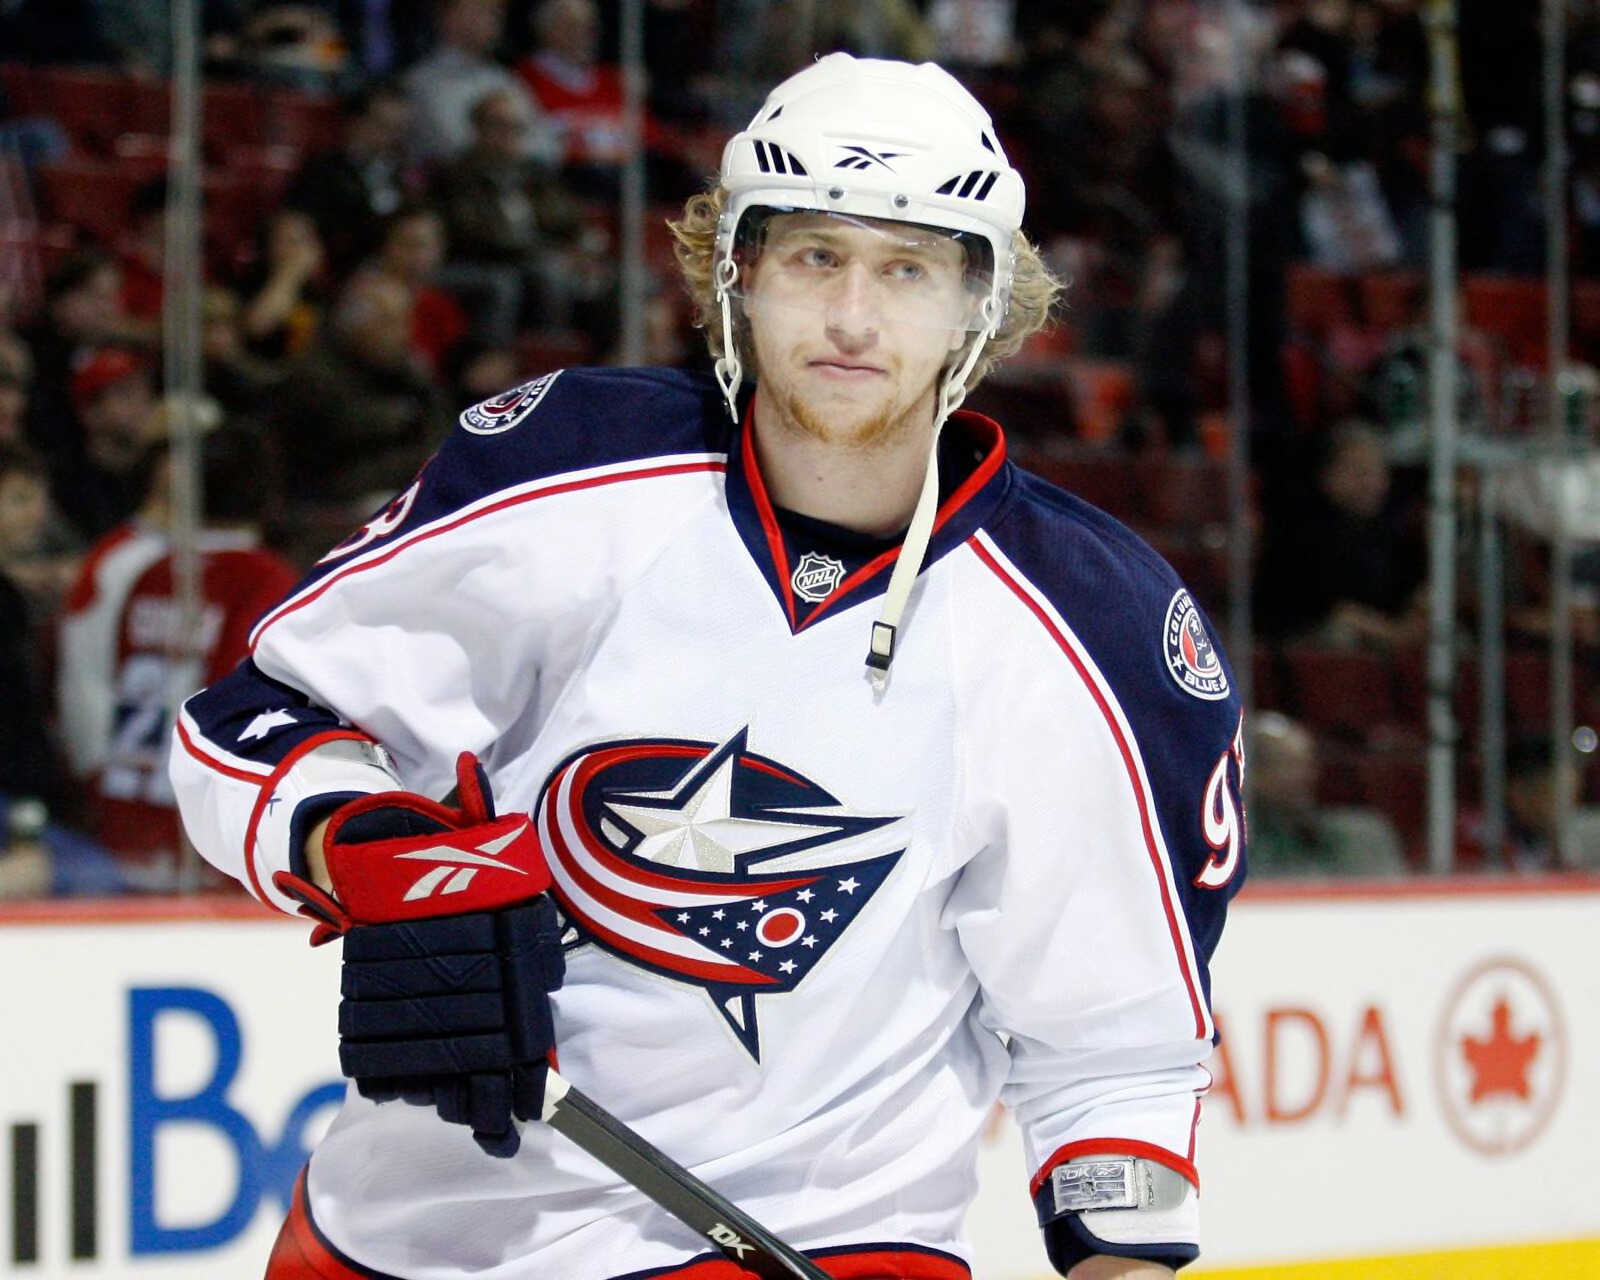 Jakub Voracek of the Columbus Blue Jackets takes the puck on a